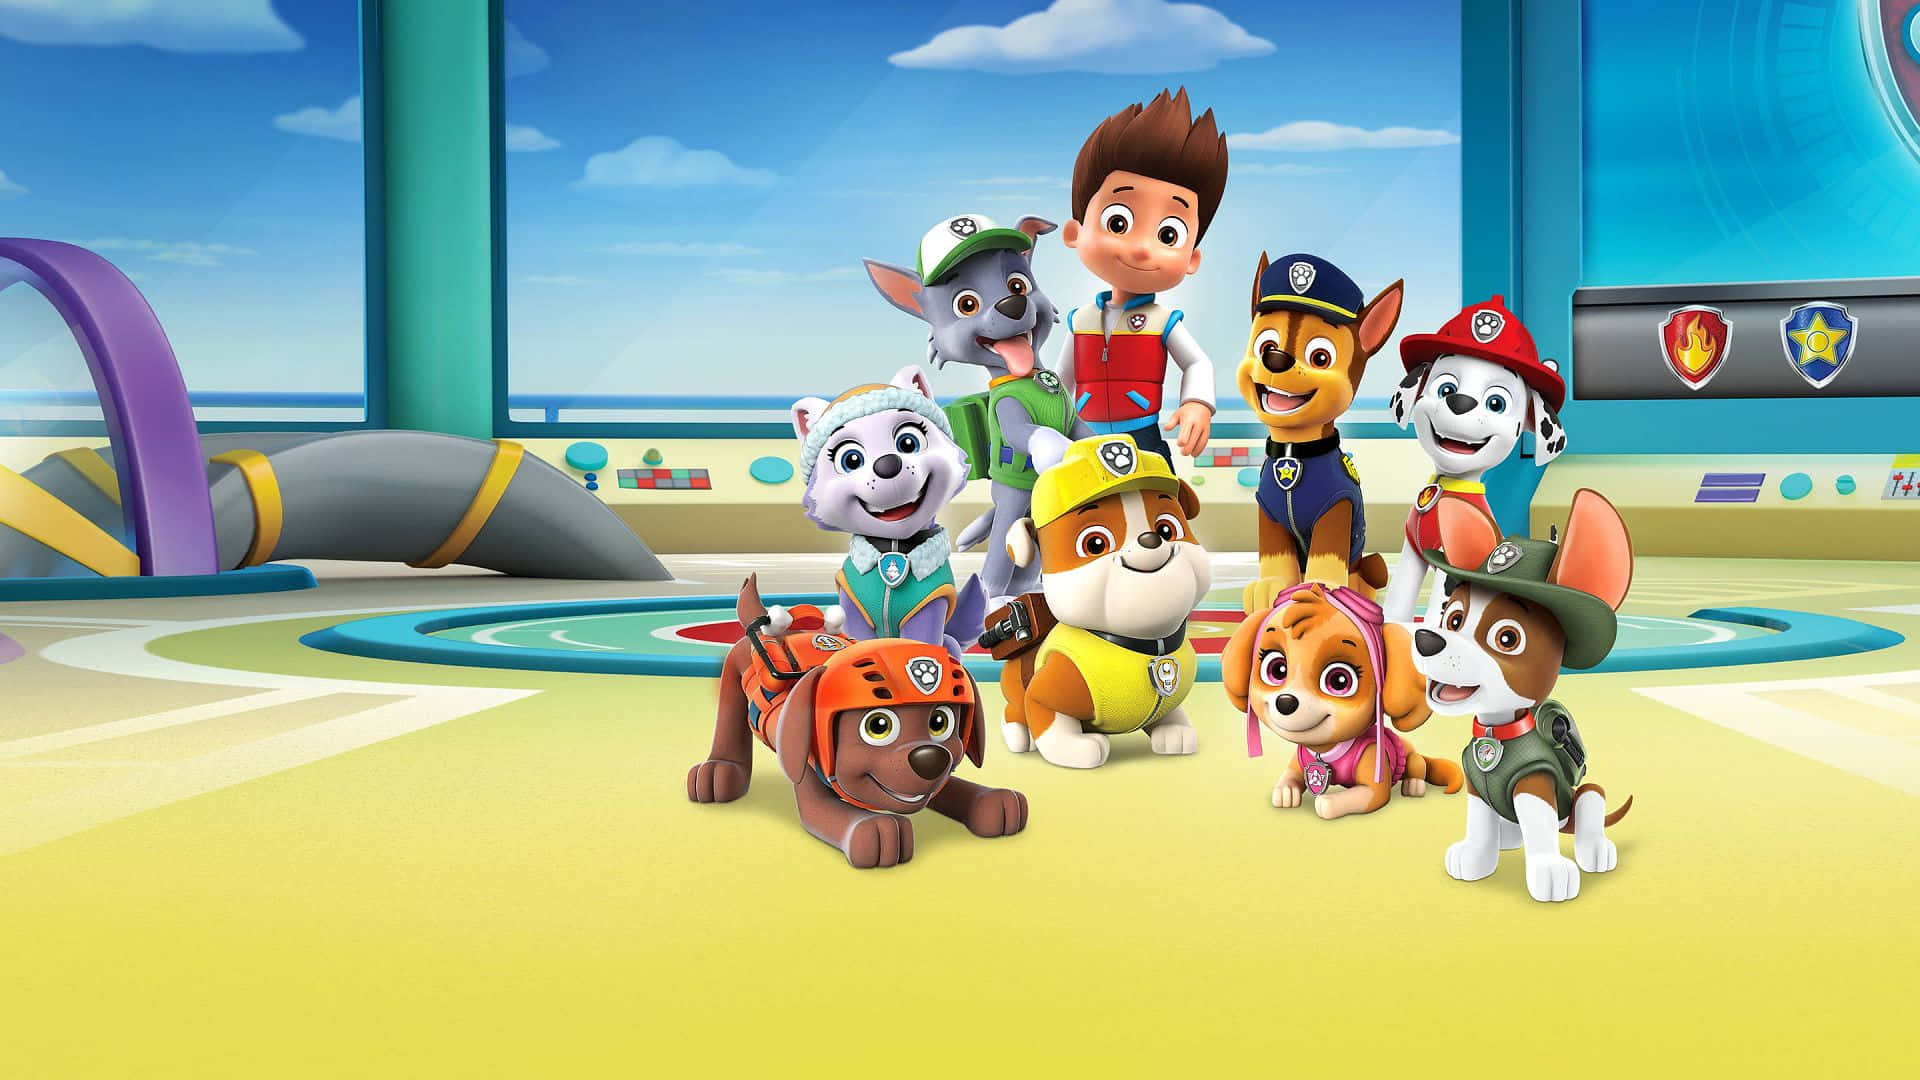 Join the Pups of PAW Patrol On Their Next Adventure!